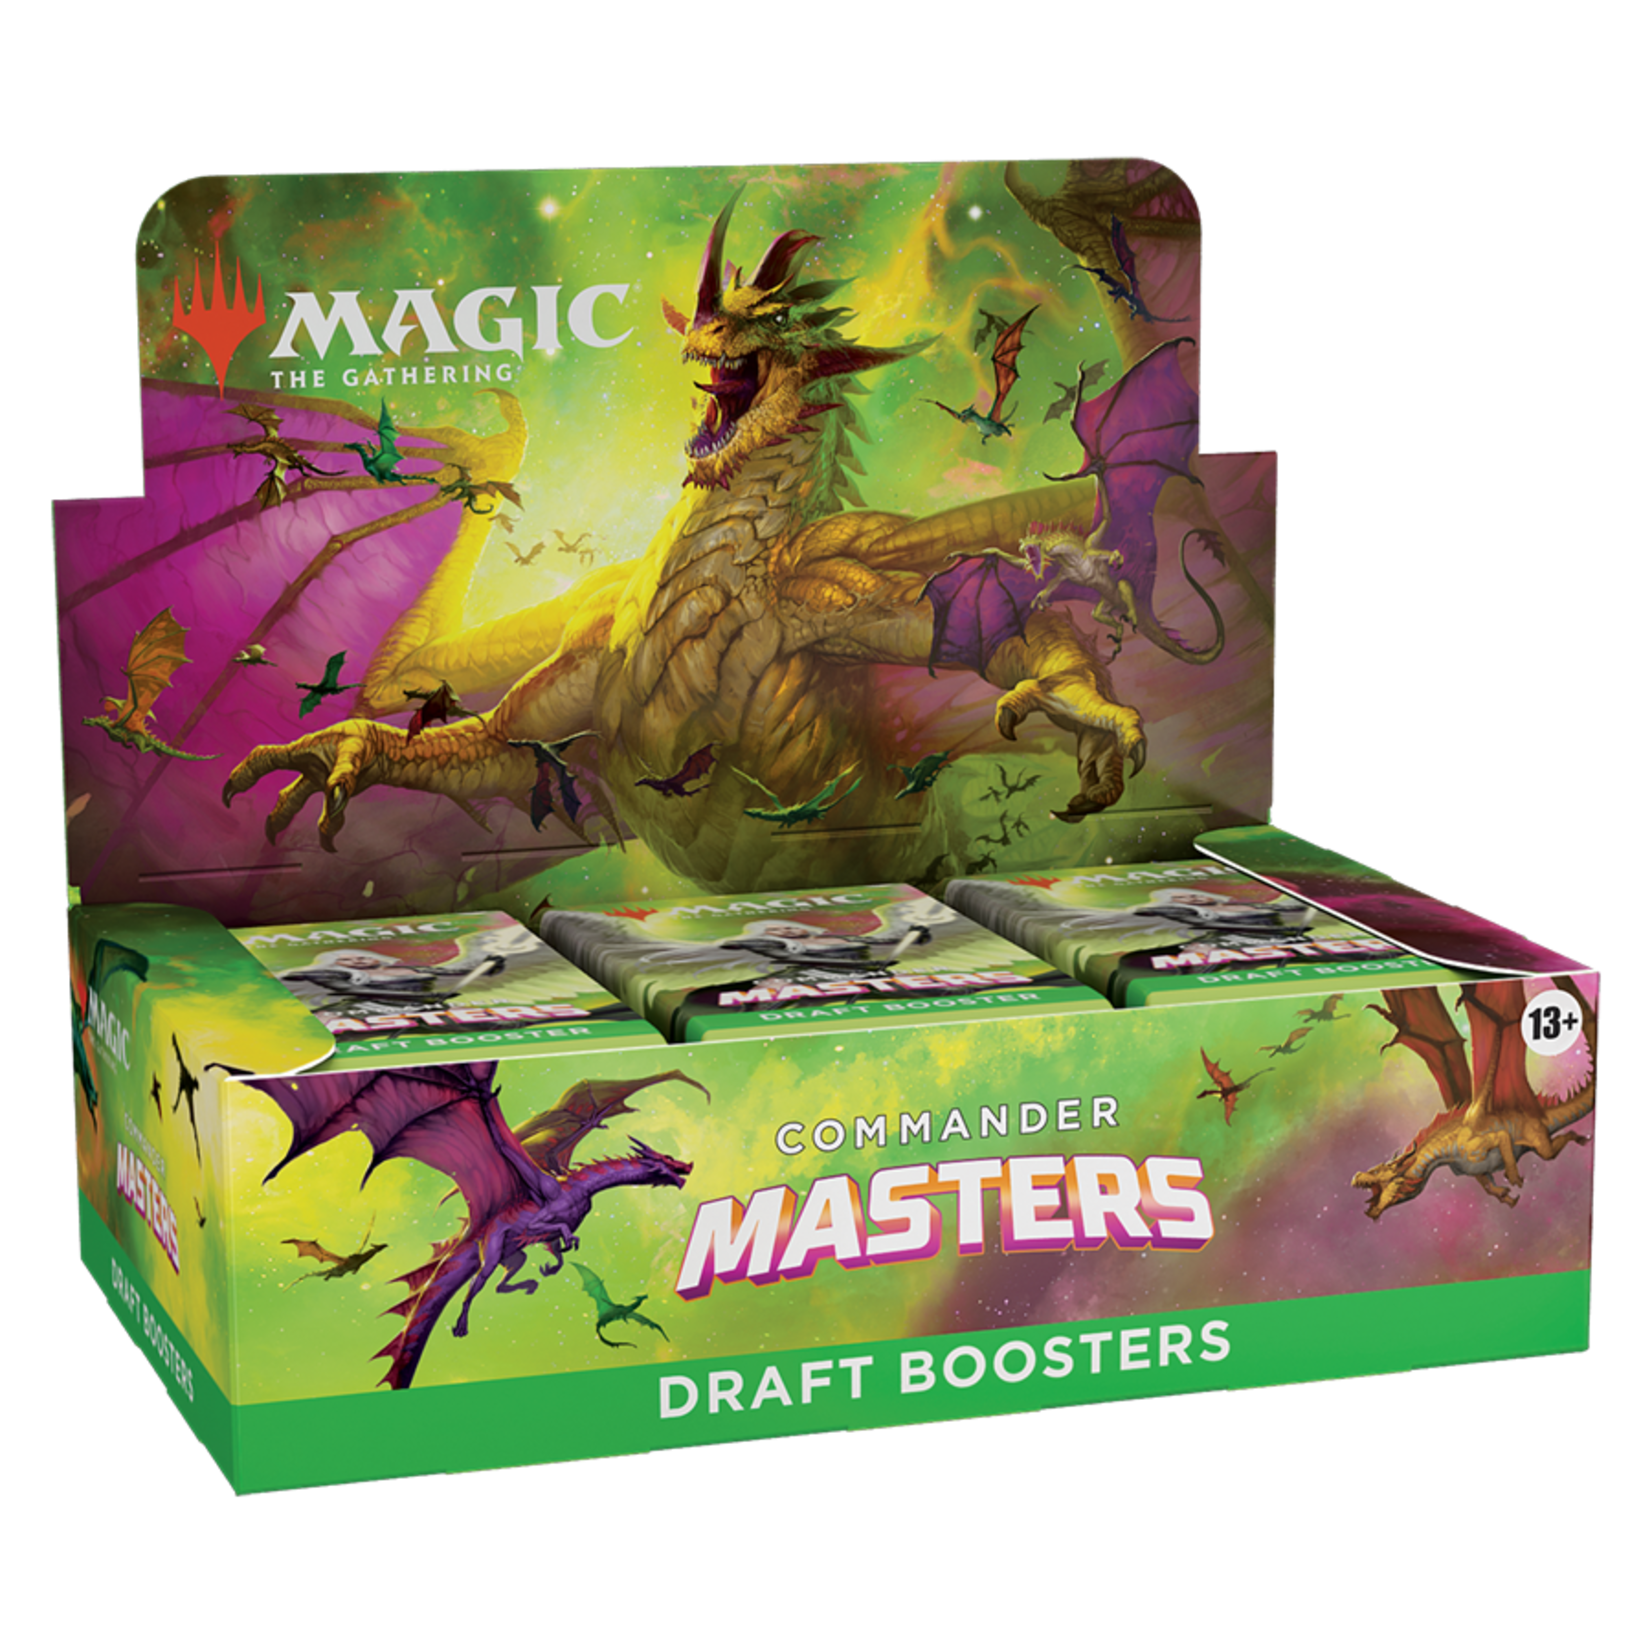 Wizards of the Coast Magic - Commander Masters Draft Booster Box